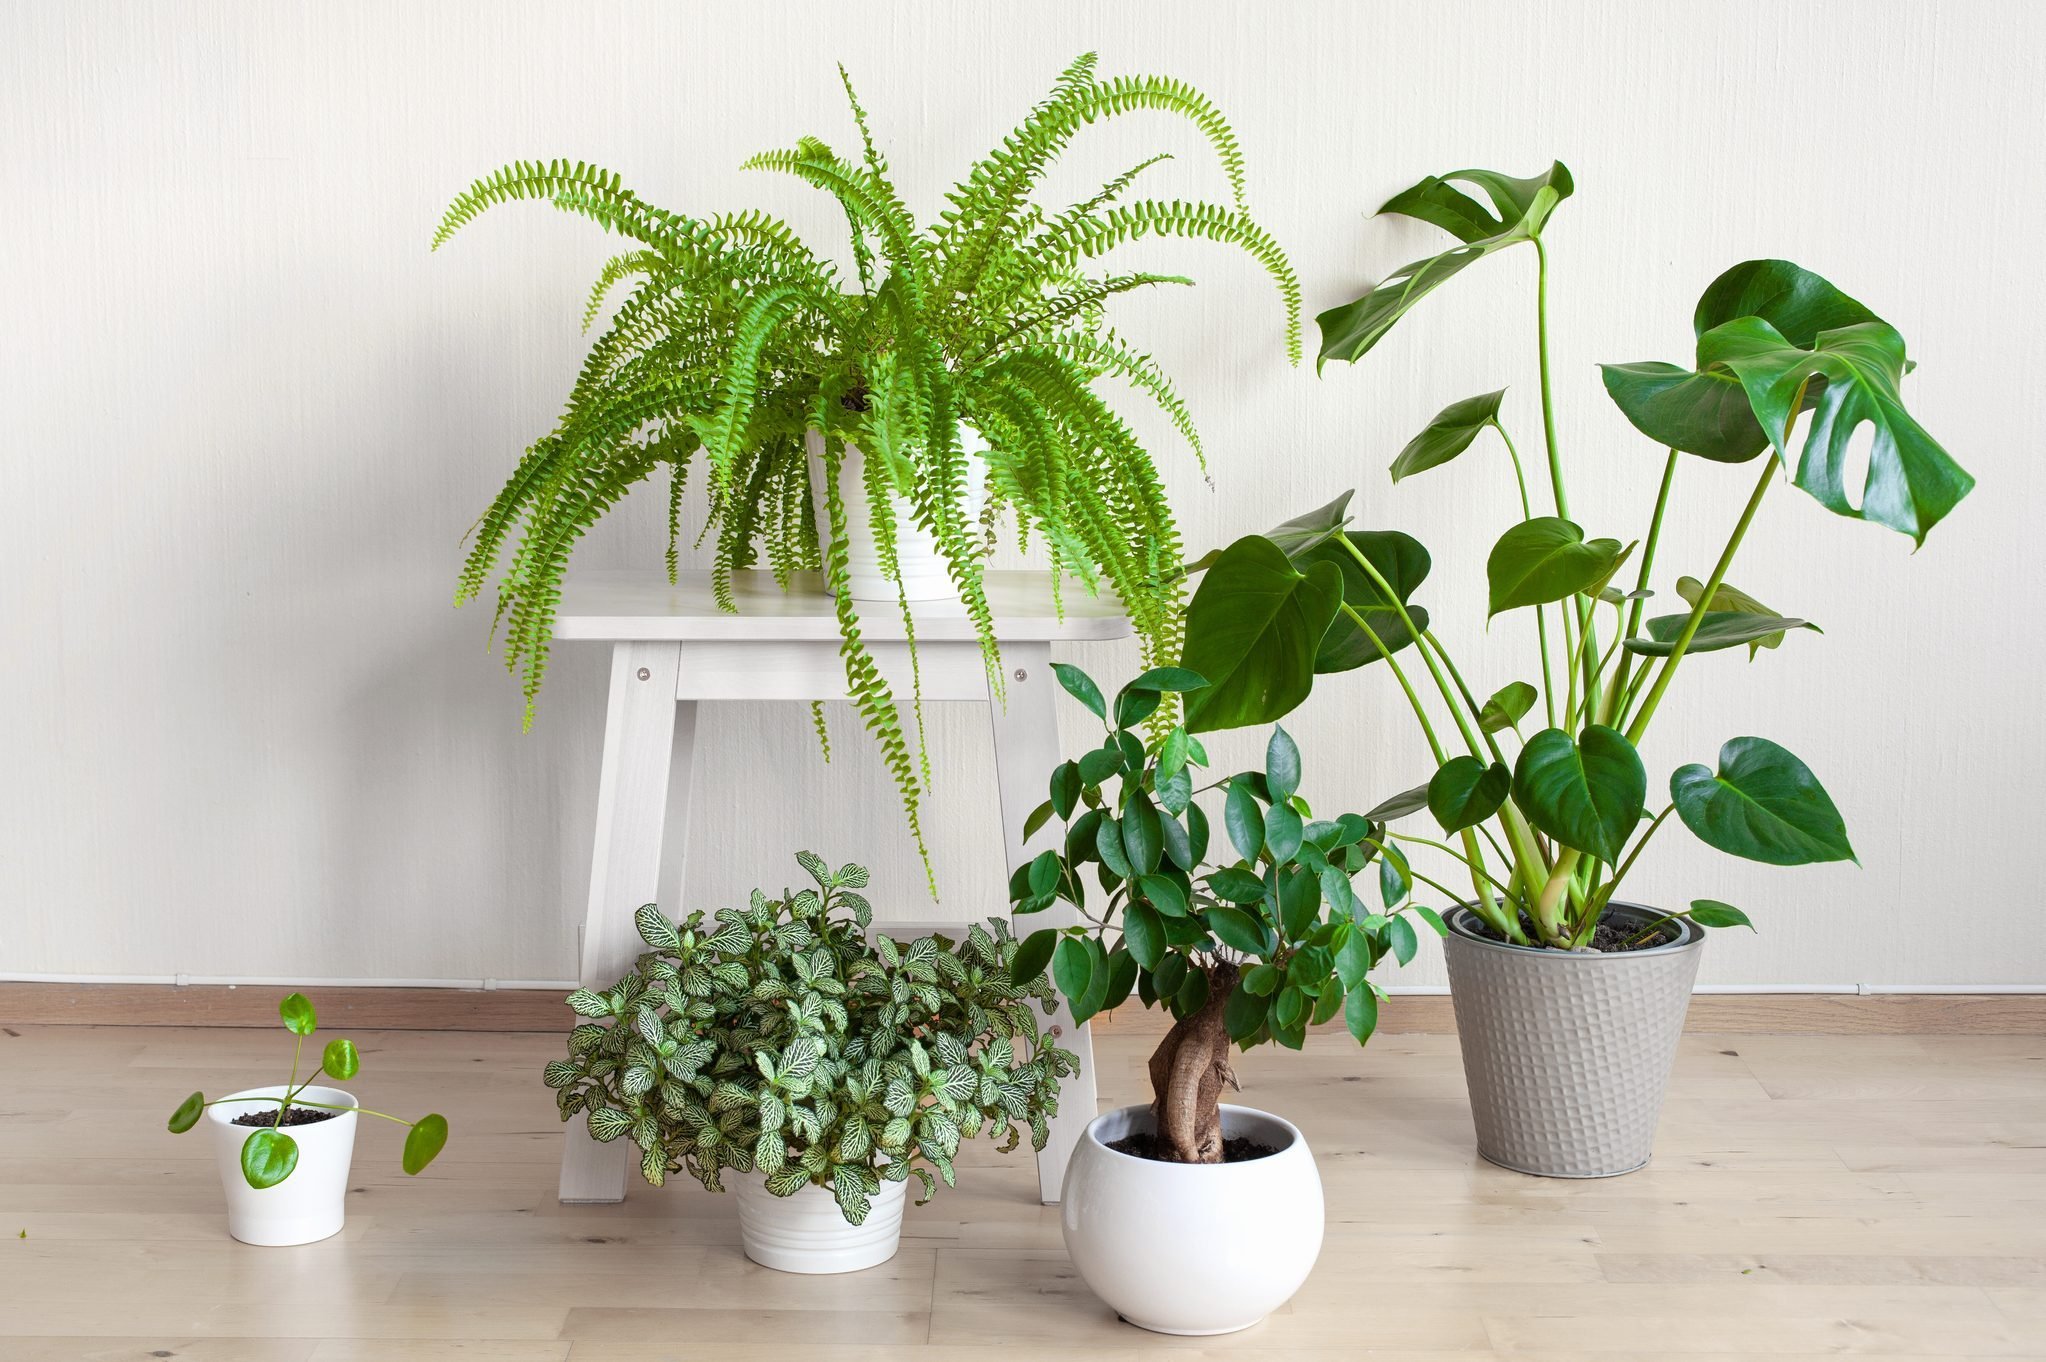 houseplants fittonia, monstera, nephrolepis and ficus microcarpa ginseng in white flowerpots